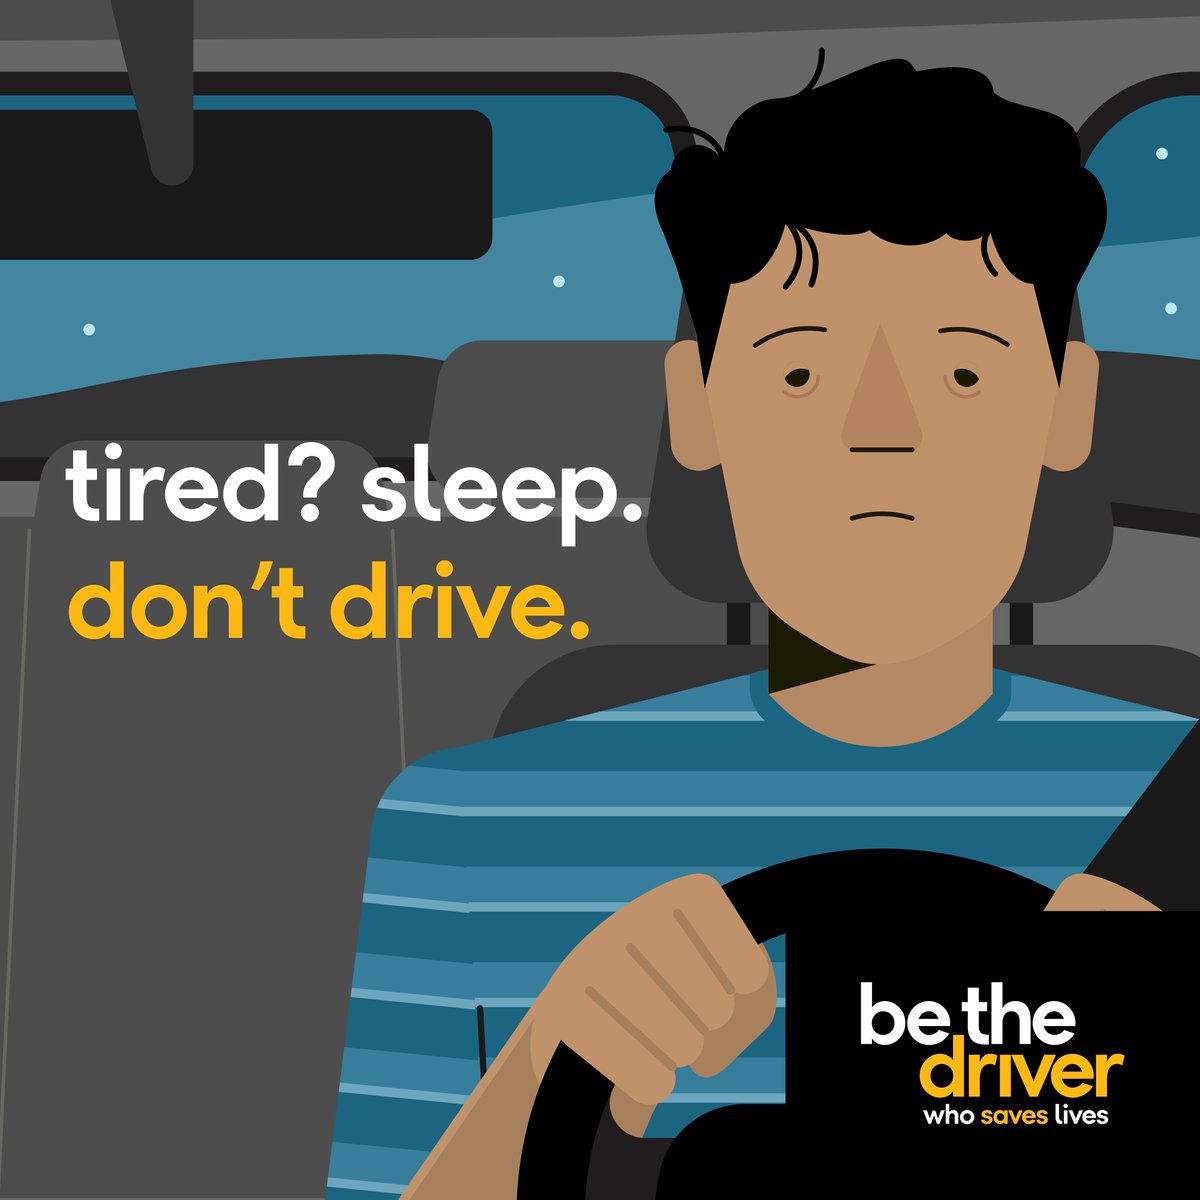 #BeTheDriver who avoids #DrowsyDriving and knows when to take a rest. #DistractedDriving #BCoPD #driver #safety #focus